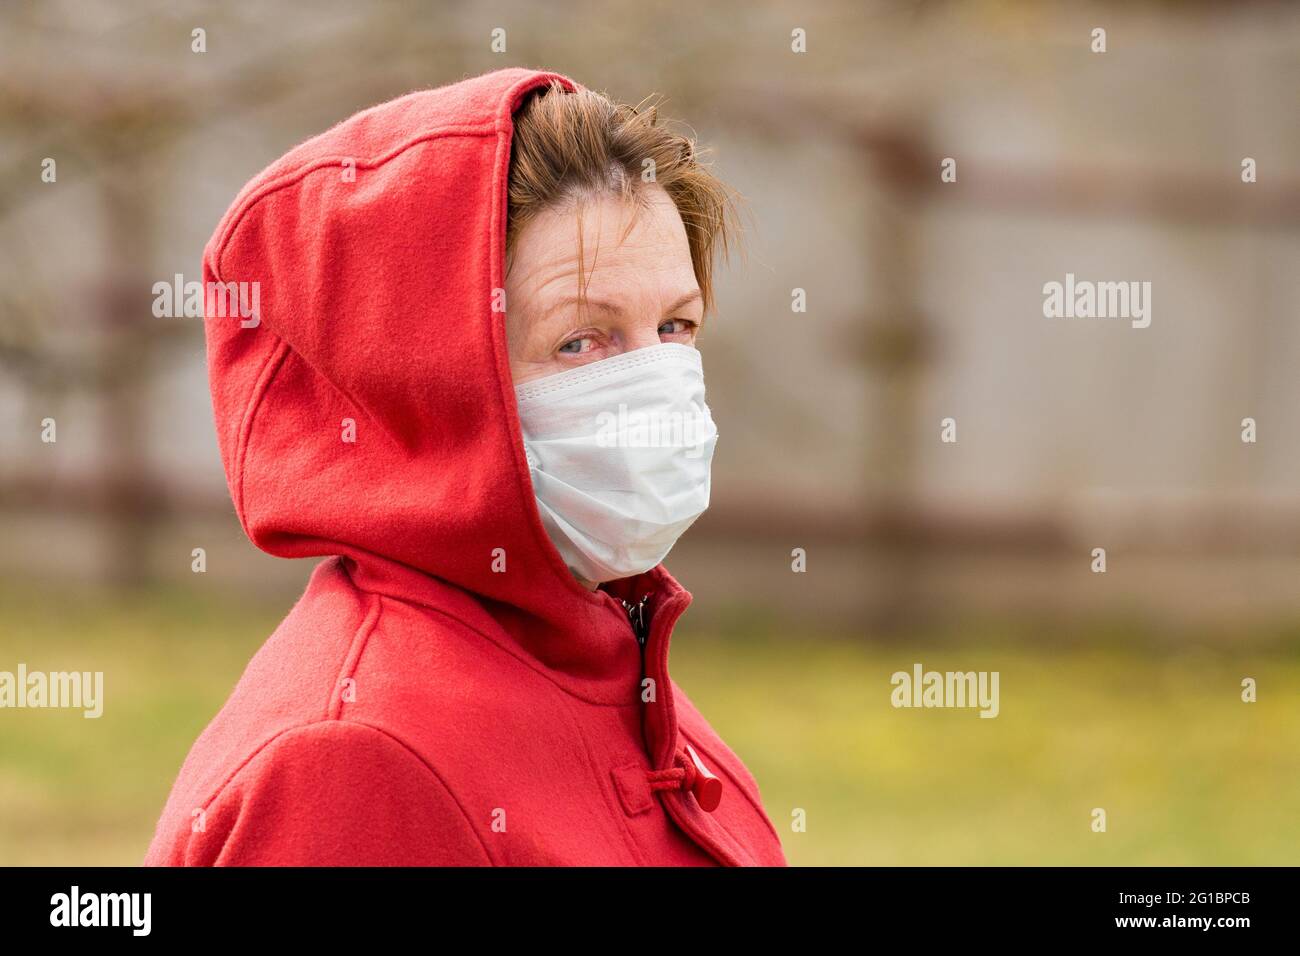 An elderly woman with brown hair and blue eyes in a red coat and hood in a protective safe medical mask, close-up portrait. Stock Photo